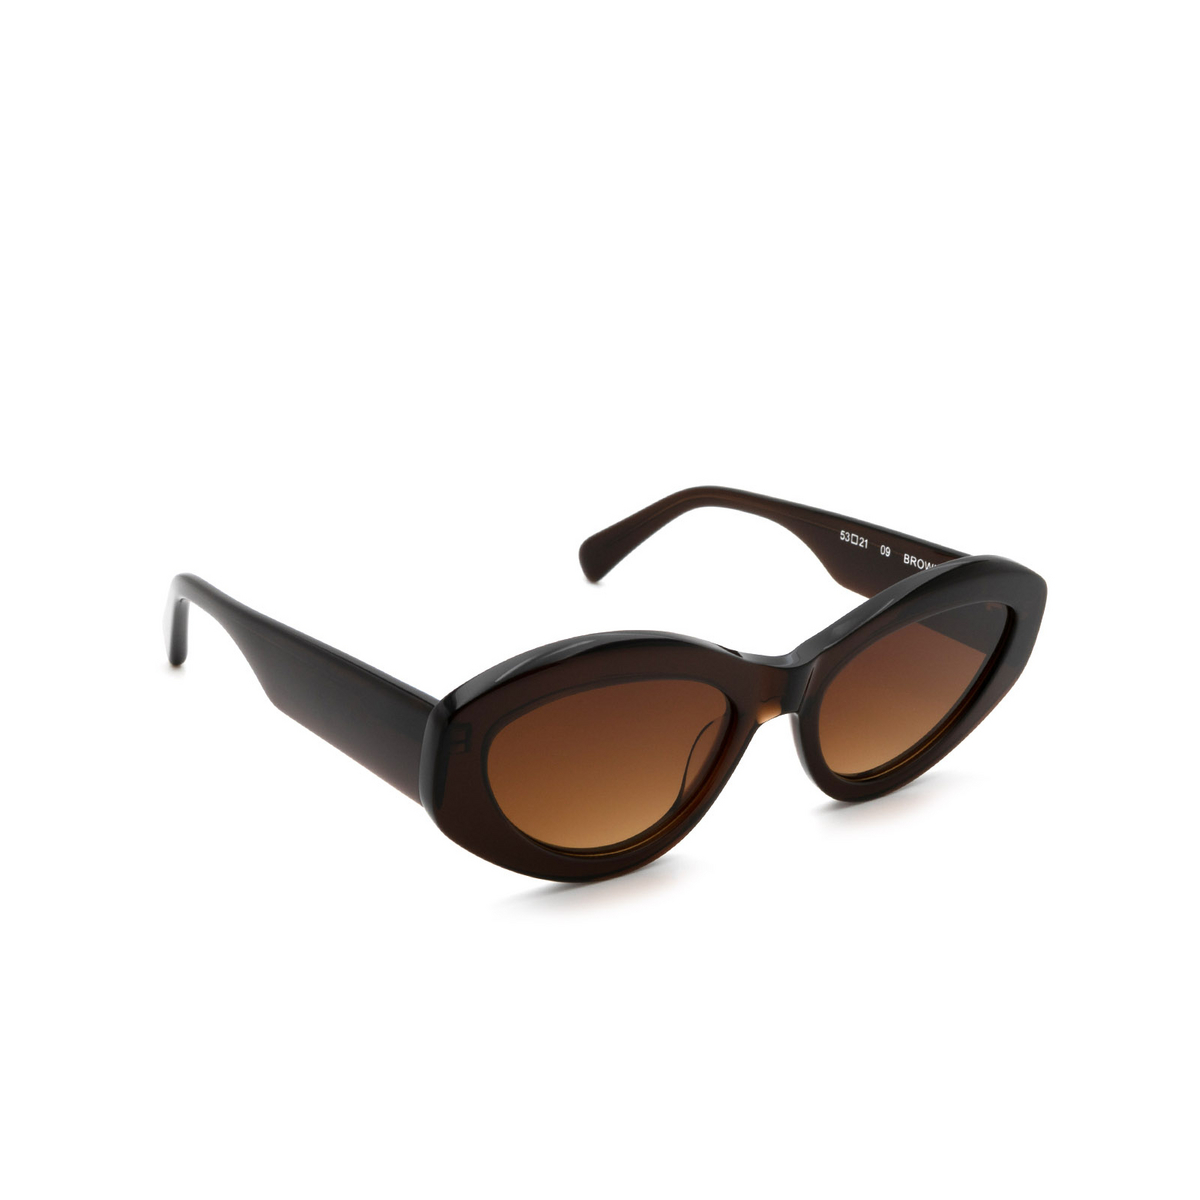 Chimi® Cat-eye Sunglasses: 09 color Brown - three-quarters view.